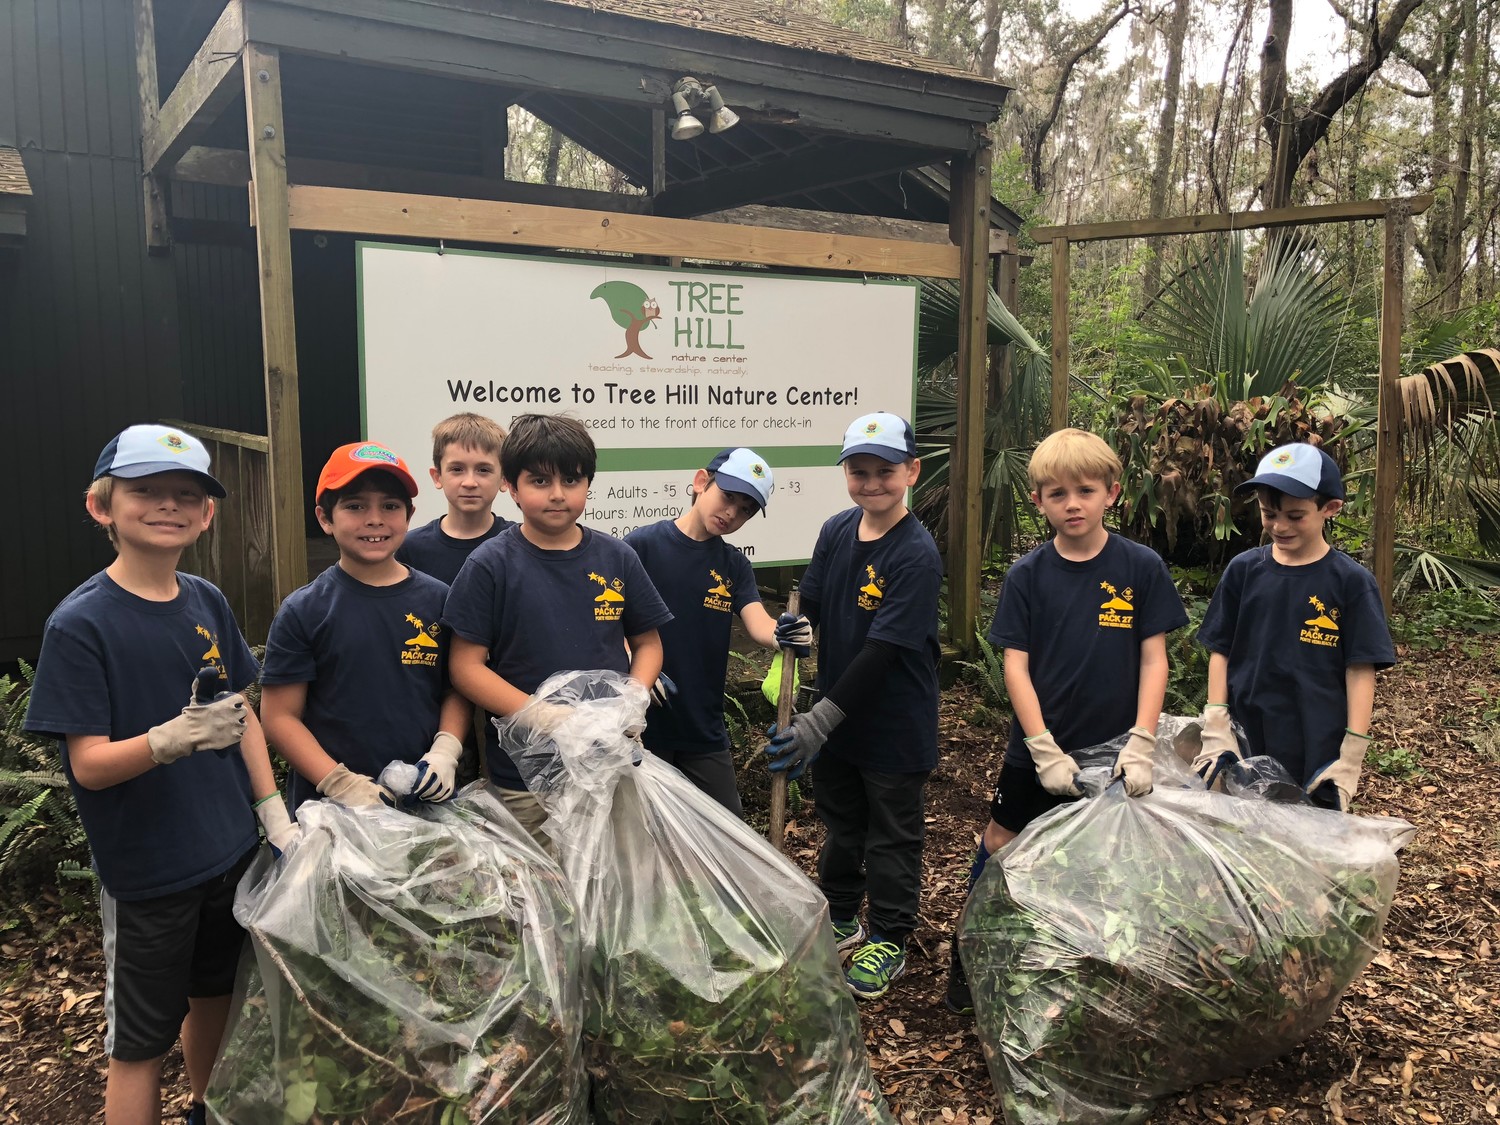 Spencer York (from left), Jackson Bohsali, Forrest Lindow, Ryan Tawk, Seth Dowling, Austin Barber, Carter Stoltz and Conner Dunning of Cub Scouts Pack 277 (Ponte Vedra Beach) complete a community service project at Tree Hill Nature Center in Jacksonville. The boys pulled weeds and cleaned up the entrance to the nature center on Jan. 27.